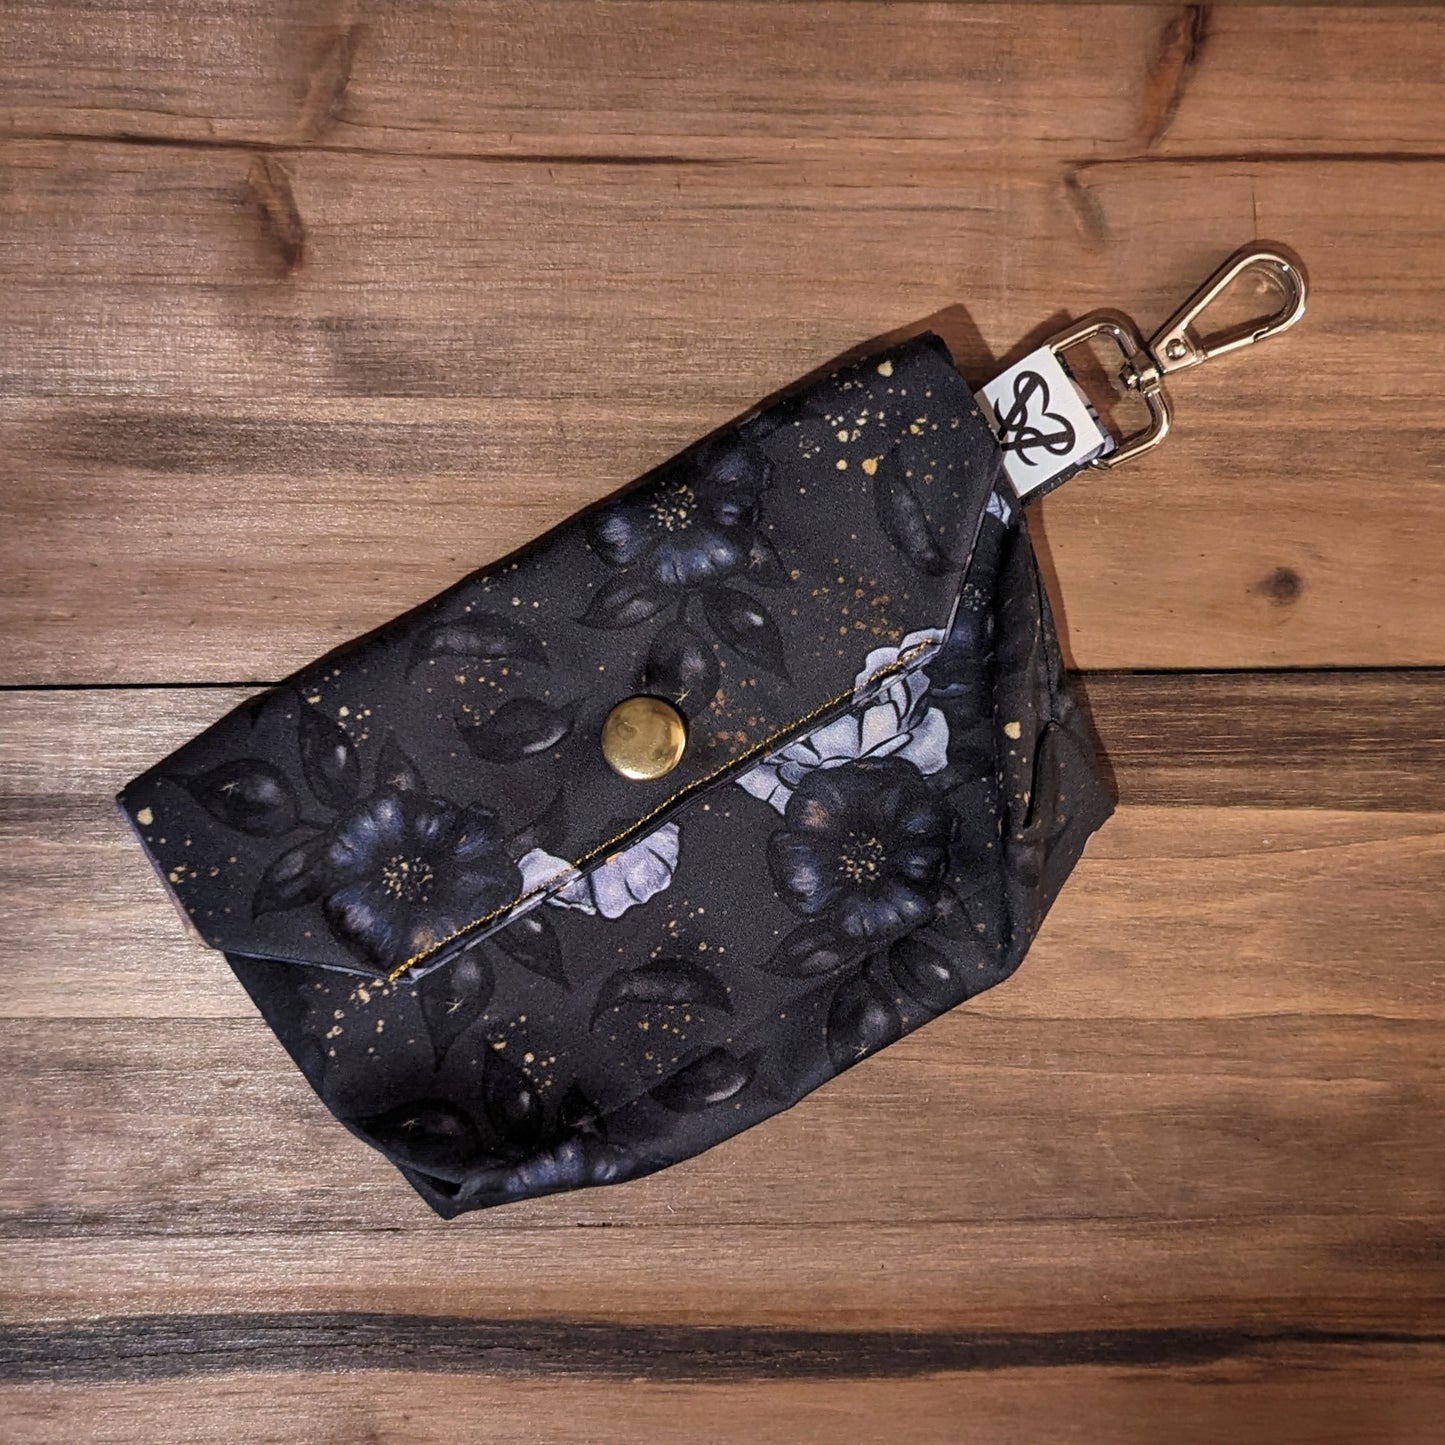 A tarot card case with black and lavender roses, black leaves, and gold speckles outside, a gold snap, and a keychain clip.